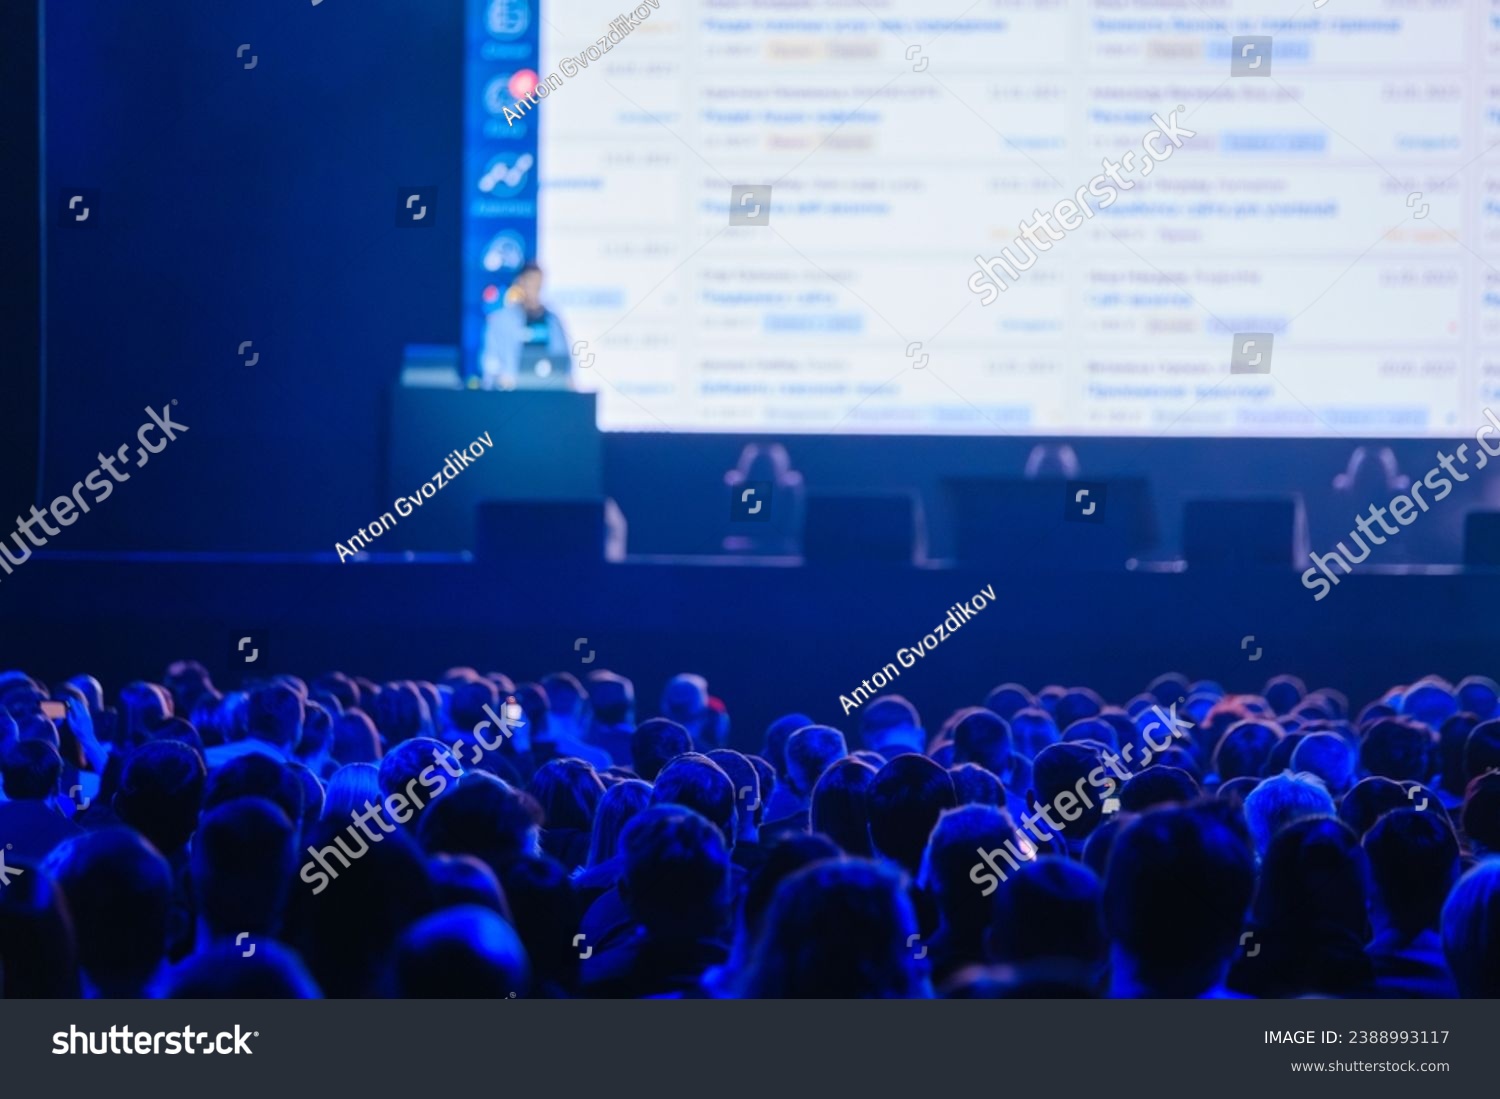 Back view of business crowd attending global presentation in illuminated blue auditorium #2388993117